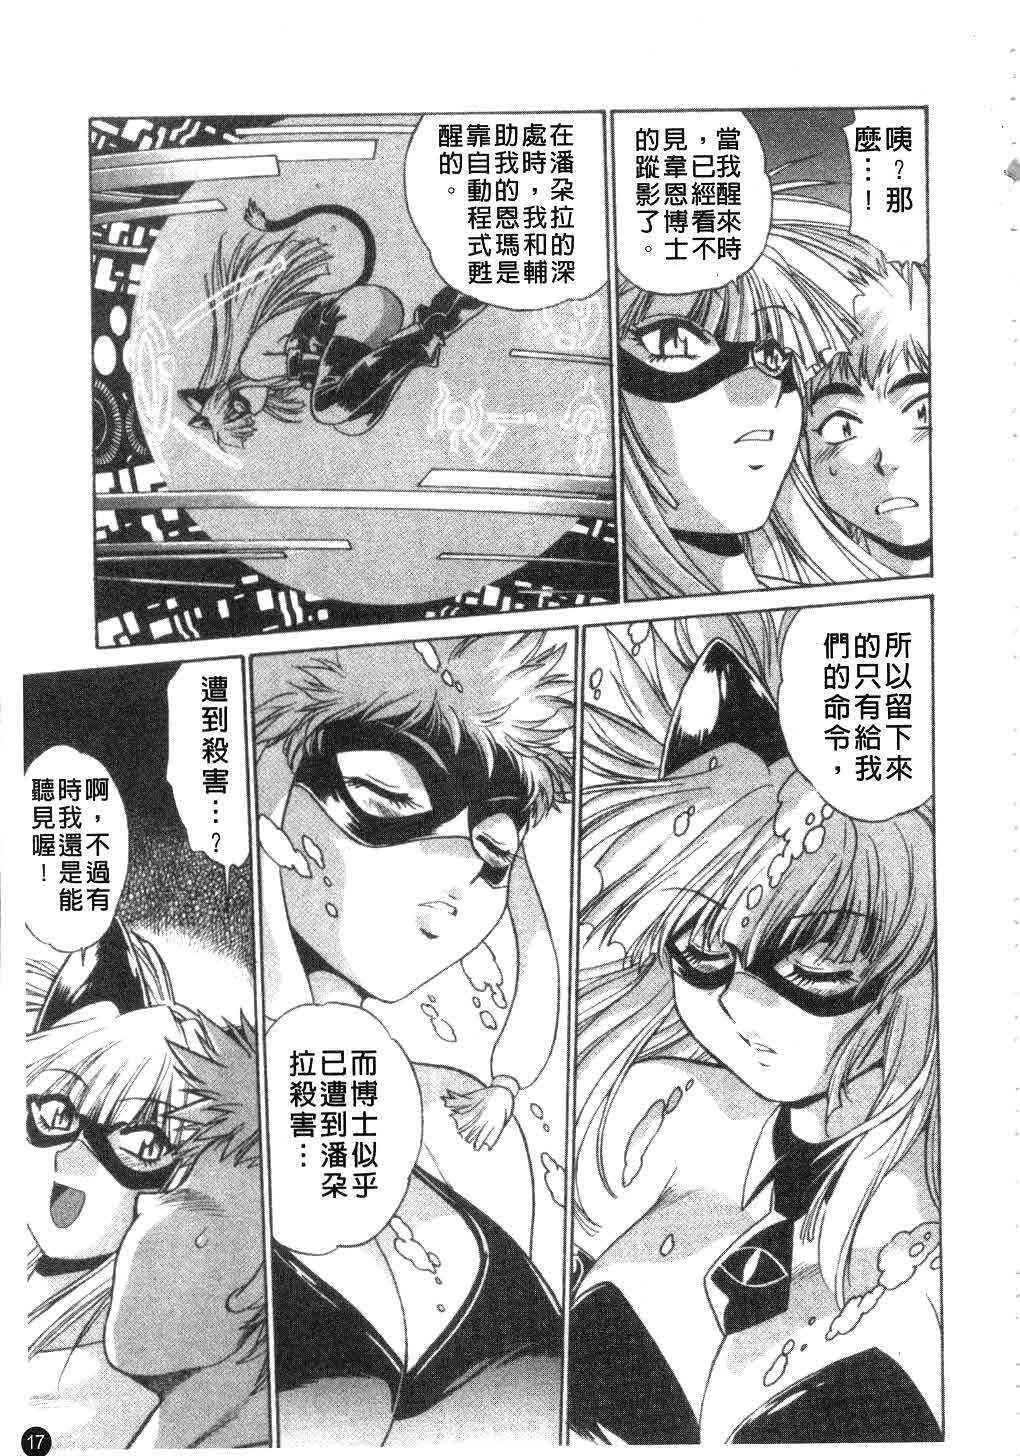 [Manabe Jouji] Tail Chaser 3 | 貓女迷情 3 [Chinese] page 18 full